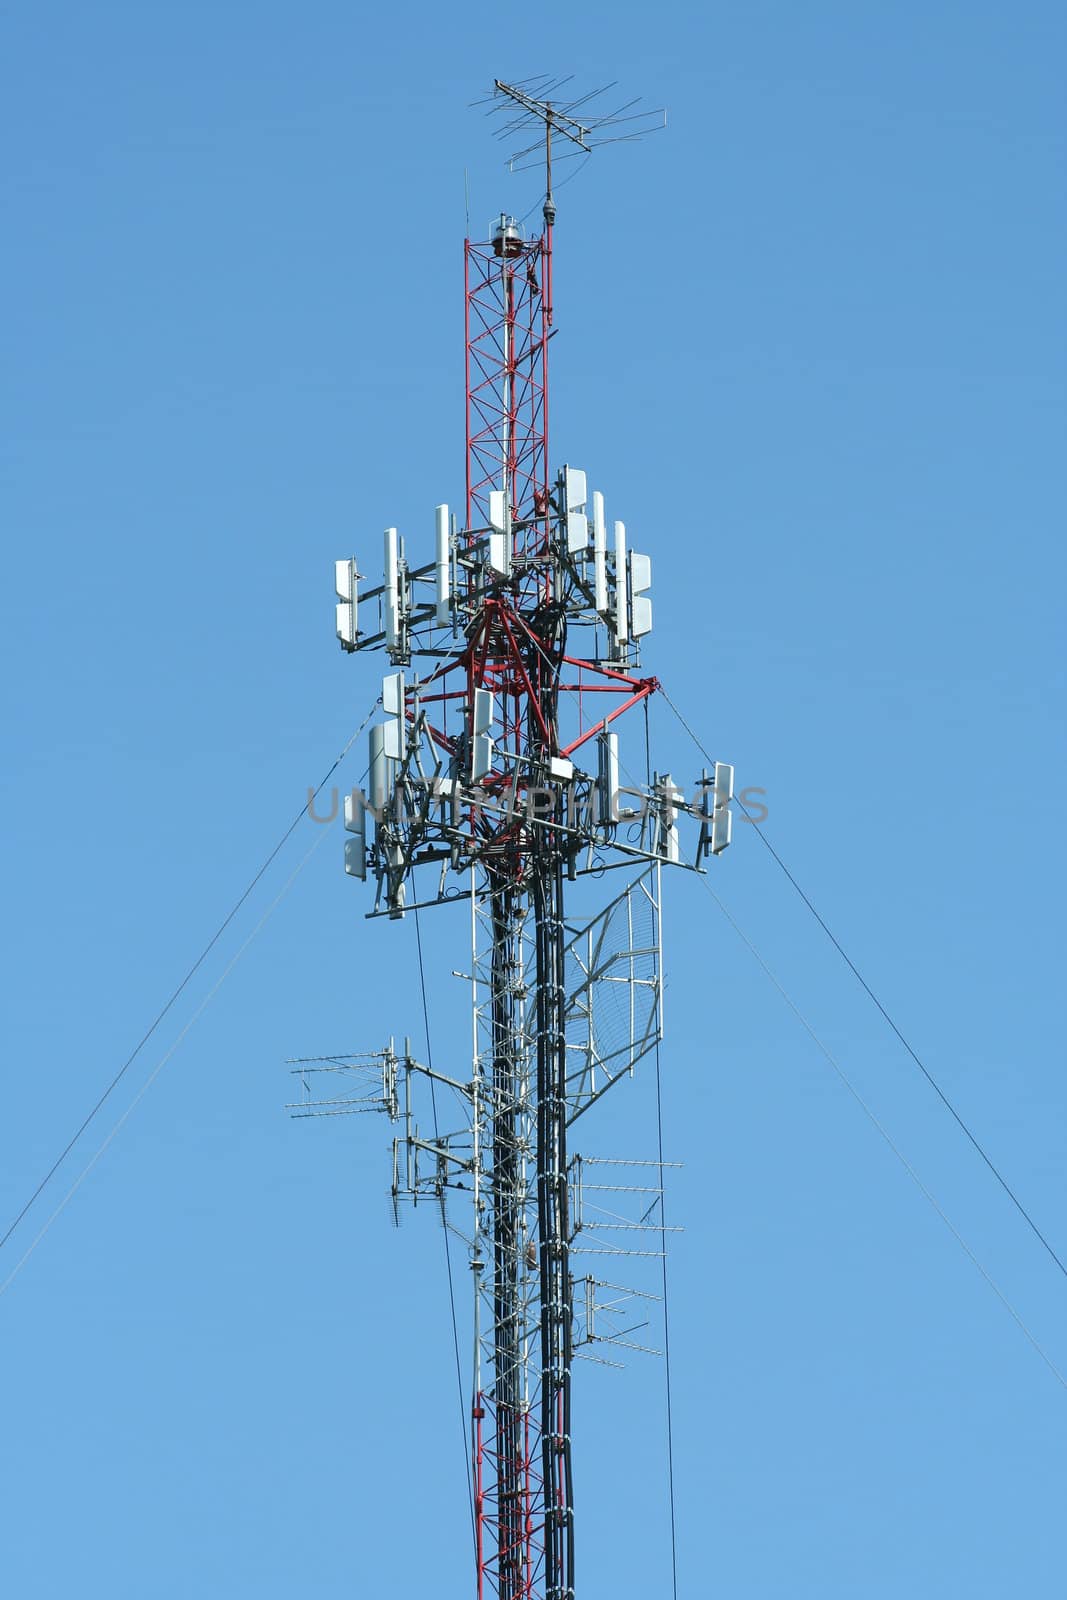 Cell Phone Tower against a blue sky